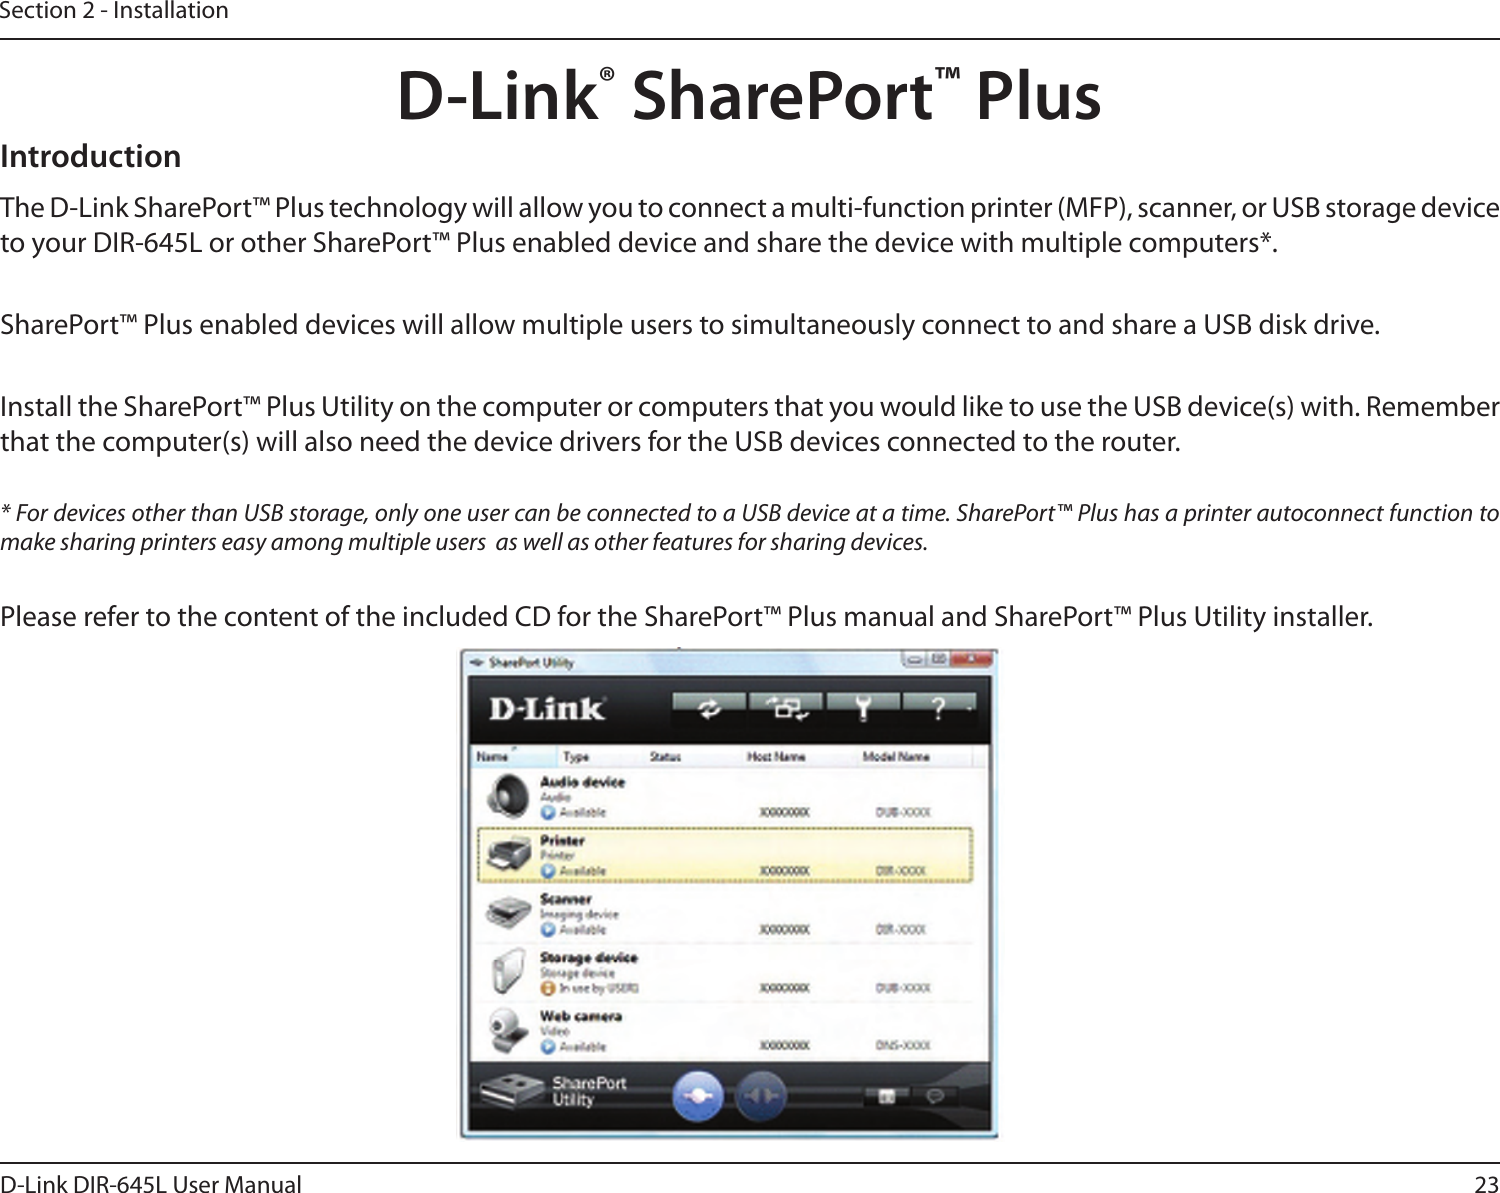 23D-Link DIR-645L User ManualSection 2 - InstallationD-Link® SharePort™ PlusIntroductionThe D-Link SharePort™ Plus technology will allow you to connect a multi-function printer (MFP), scanner, or USB storage device to your DIR-645L or other SharePort™ Plus enabled device and share the device with multiple computers*. SharePort™ Plus enabled devices will allow multiple users to simultaneously connect to and share a USB disk drive. Install the SharePort™ Plus Utility on the computer or computers that you would like to use the USB device(s) with. Remember that the computer(s) will also need the device drivers for the USB devices connected to the router.* For devices other than USB storage, only one user can be connected to a USB device at a time. SharePort™ Plus has a printer autoconnect function to make sharing printers easy among multiple users  as well as other features for sharing devices.Please refer to the content of the included CD for the SharePort™ Plus manual and SharePort™ Plus Utility installer.